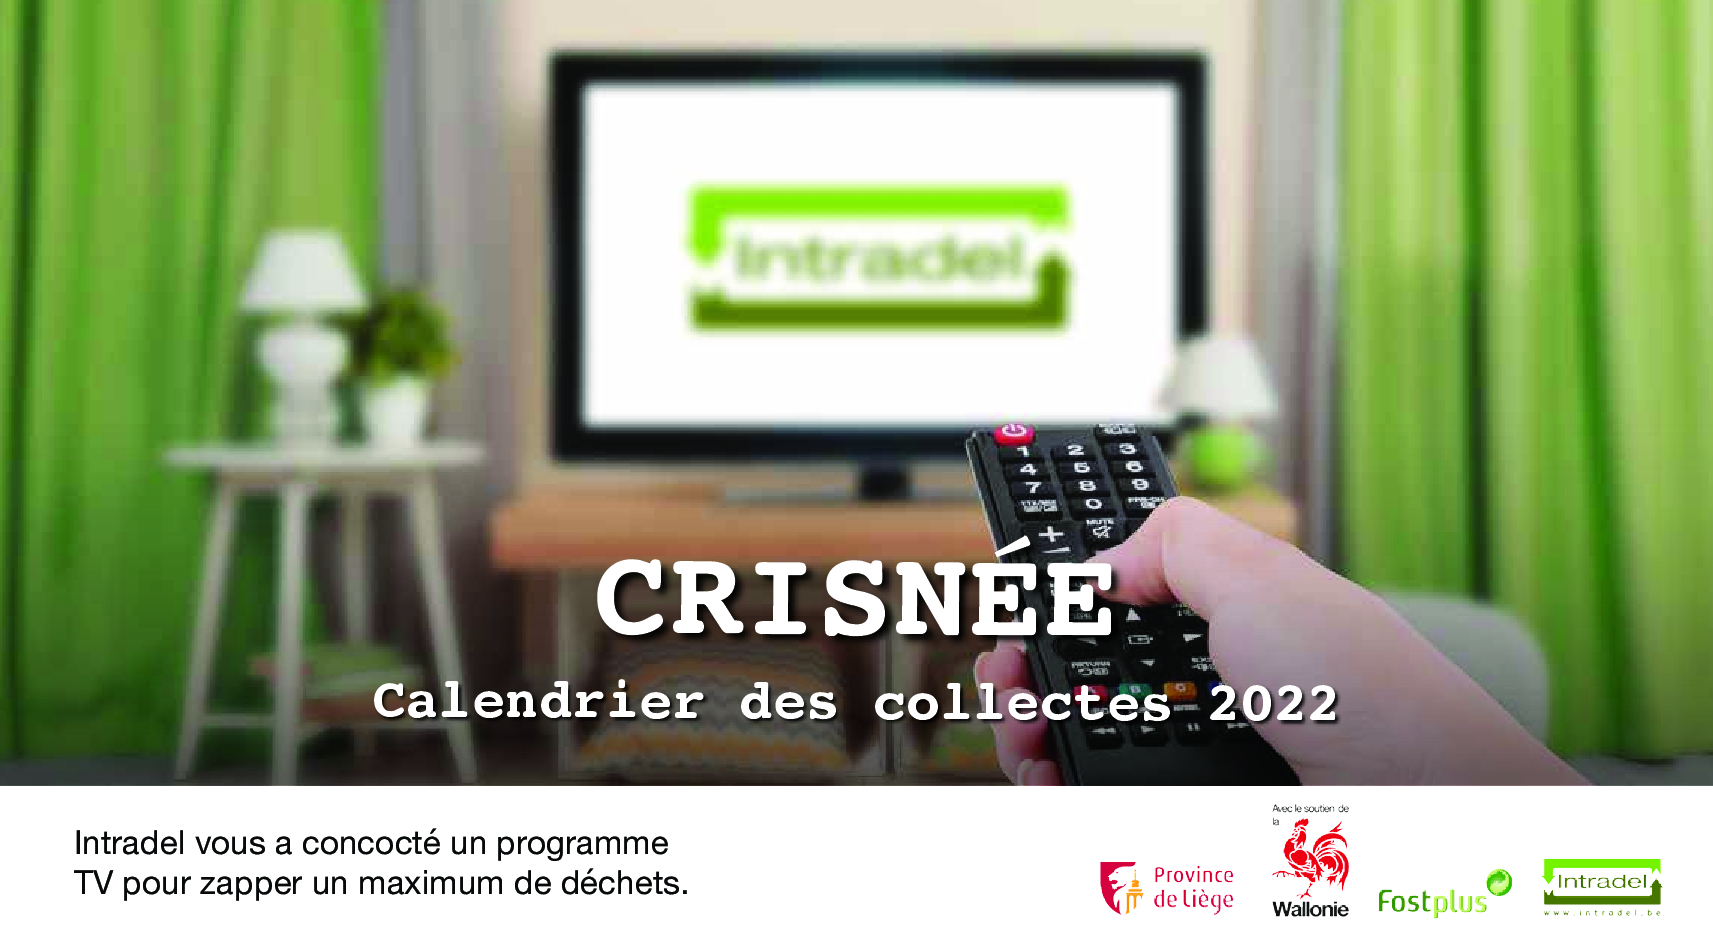 calendrier intradel 2022 image